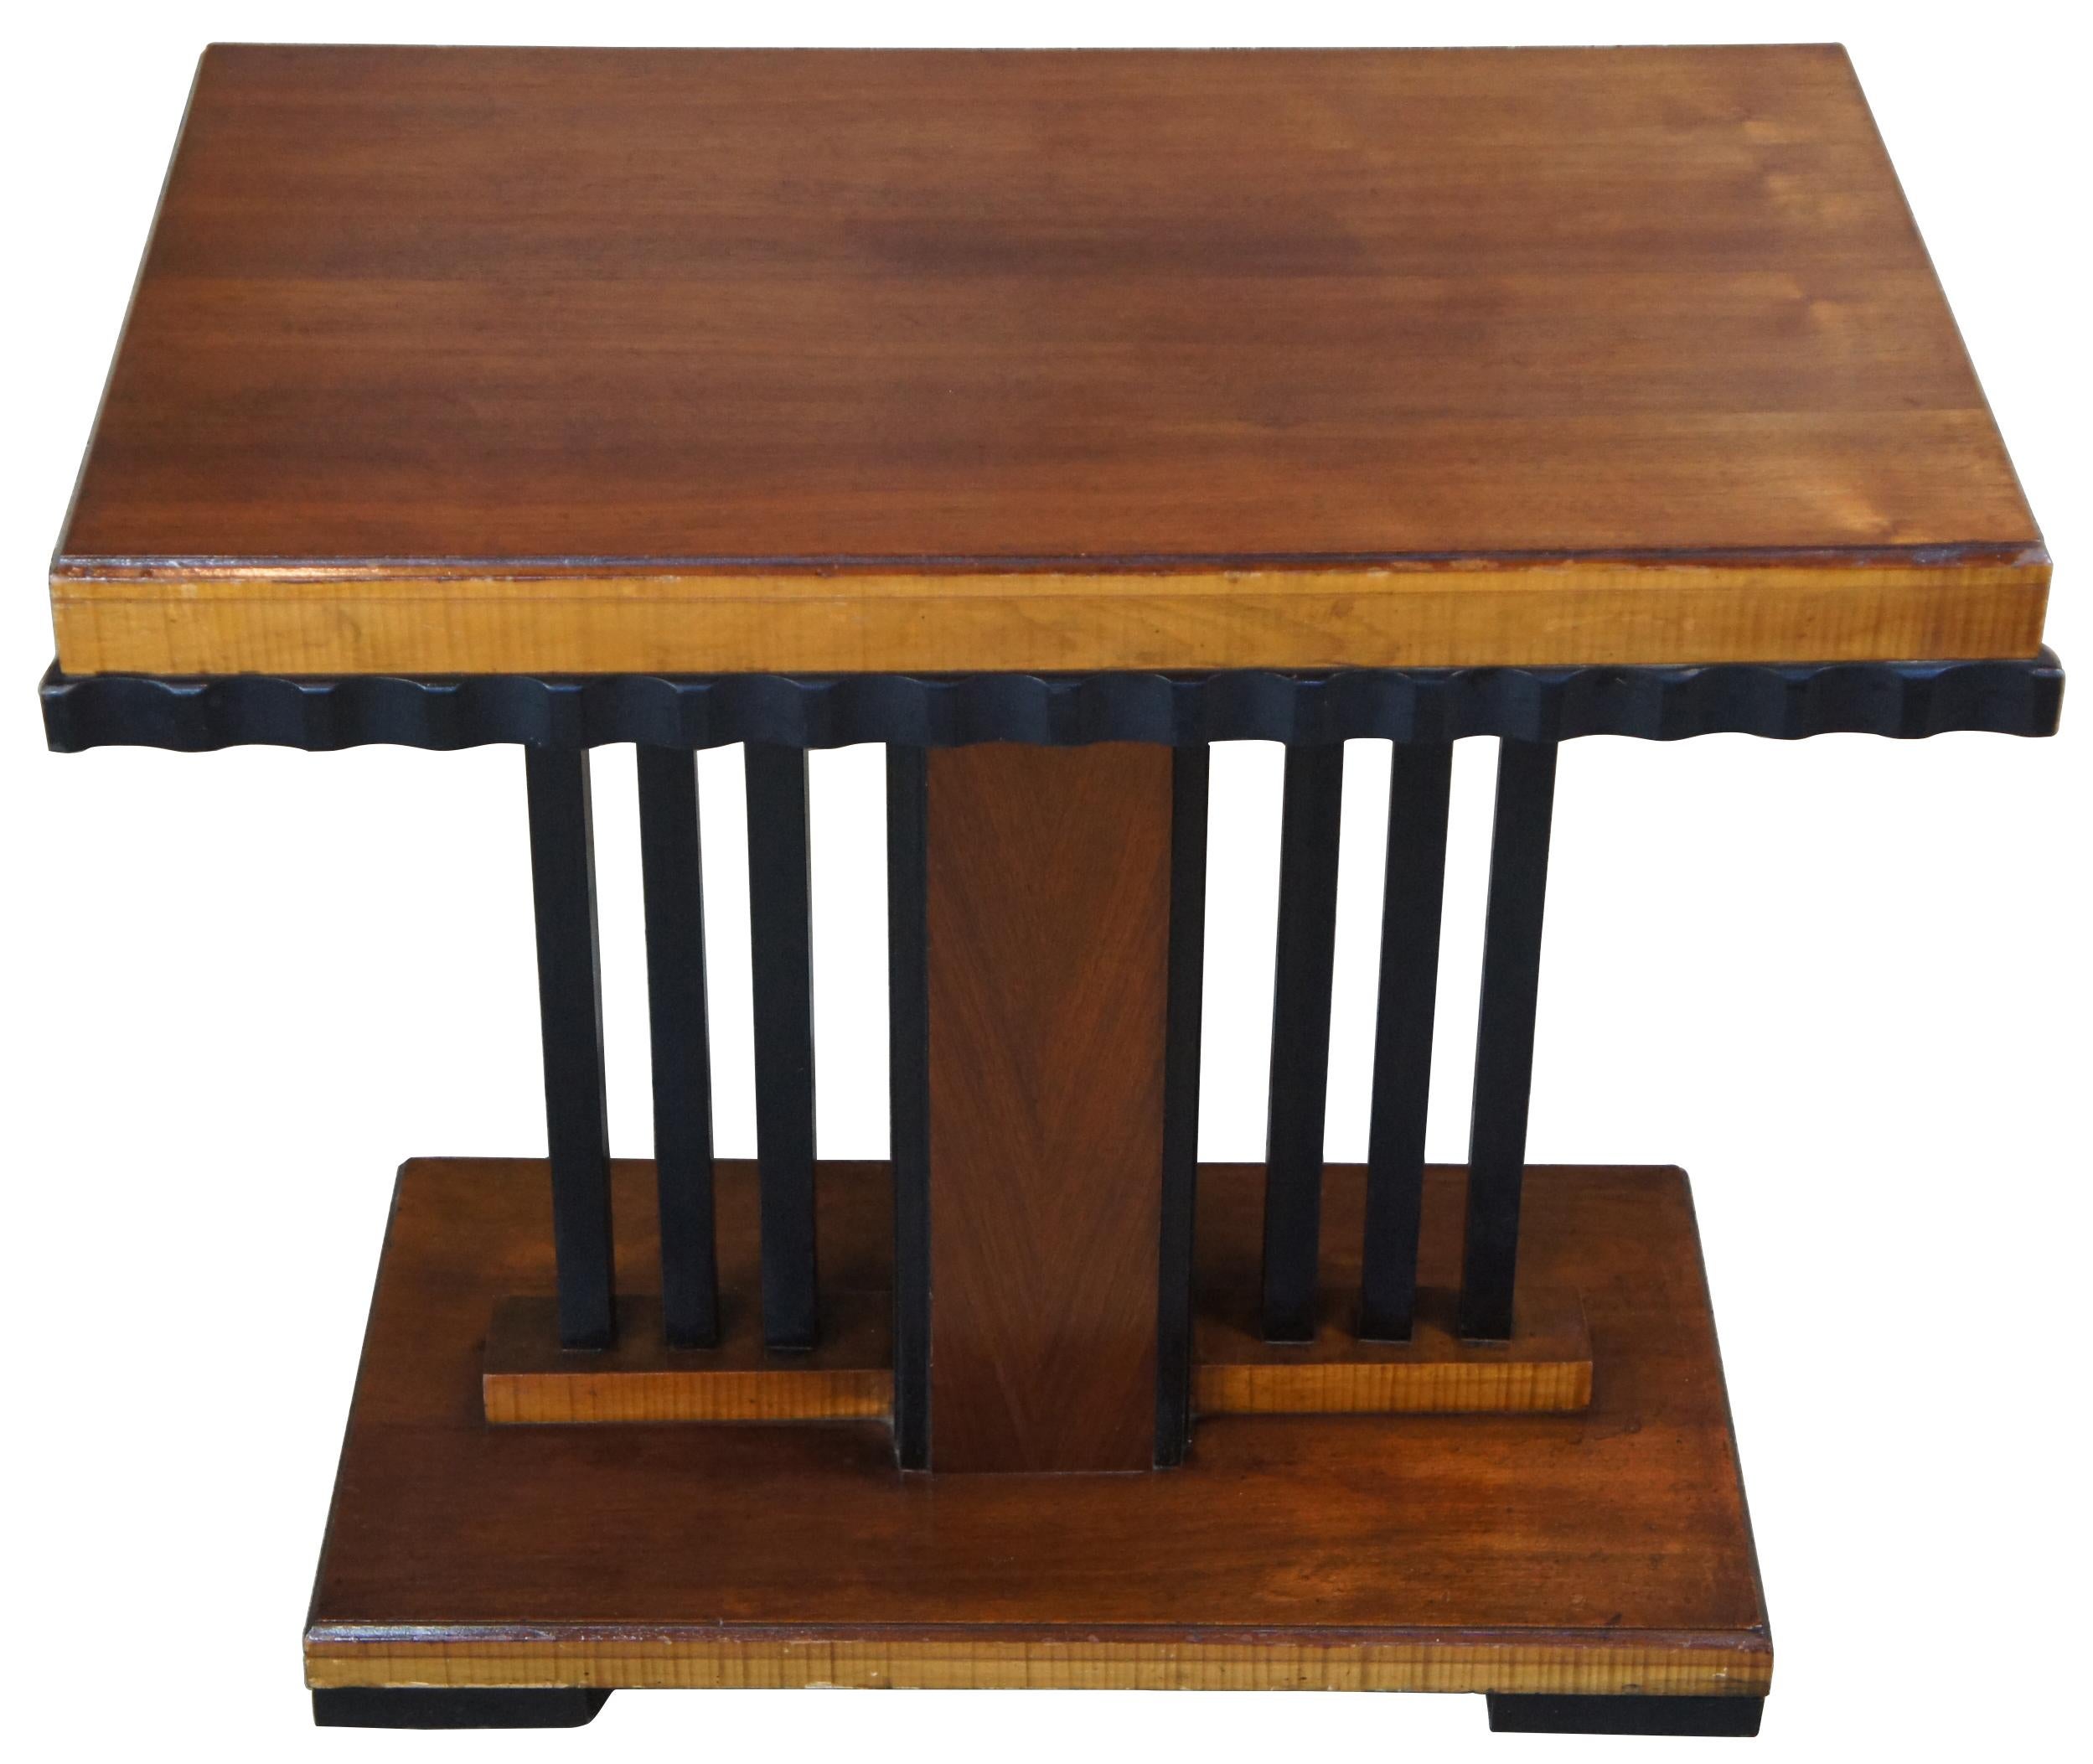 Art Deco era console or side table. Made from walnut with an ebonized ruffled apron over a slatted central support leading to base. Central column features matchbook veneer.
 